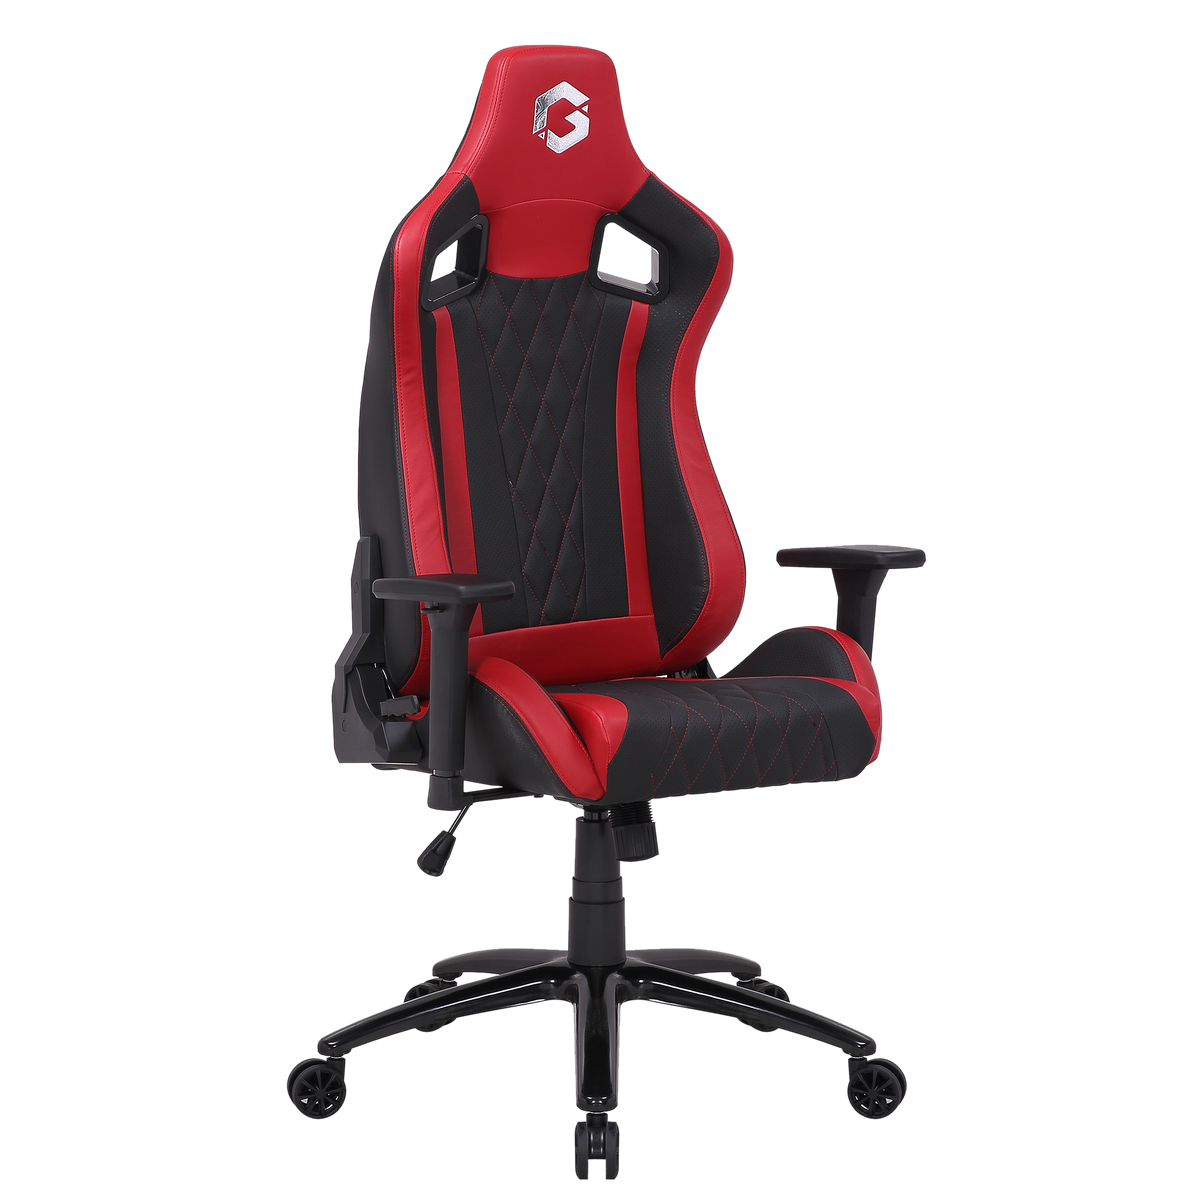 GAMEON GT Series Gaming Chair - Black/Red